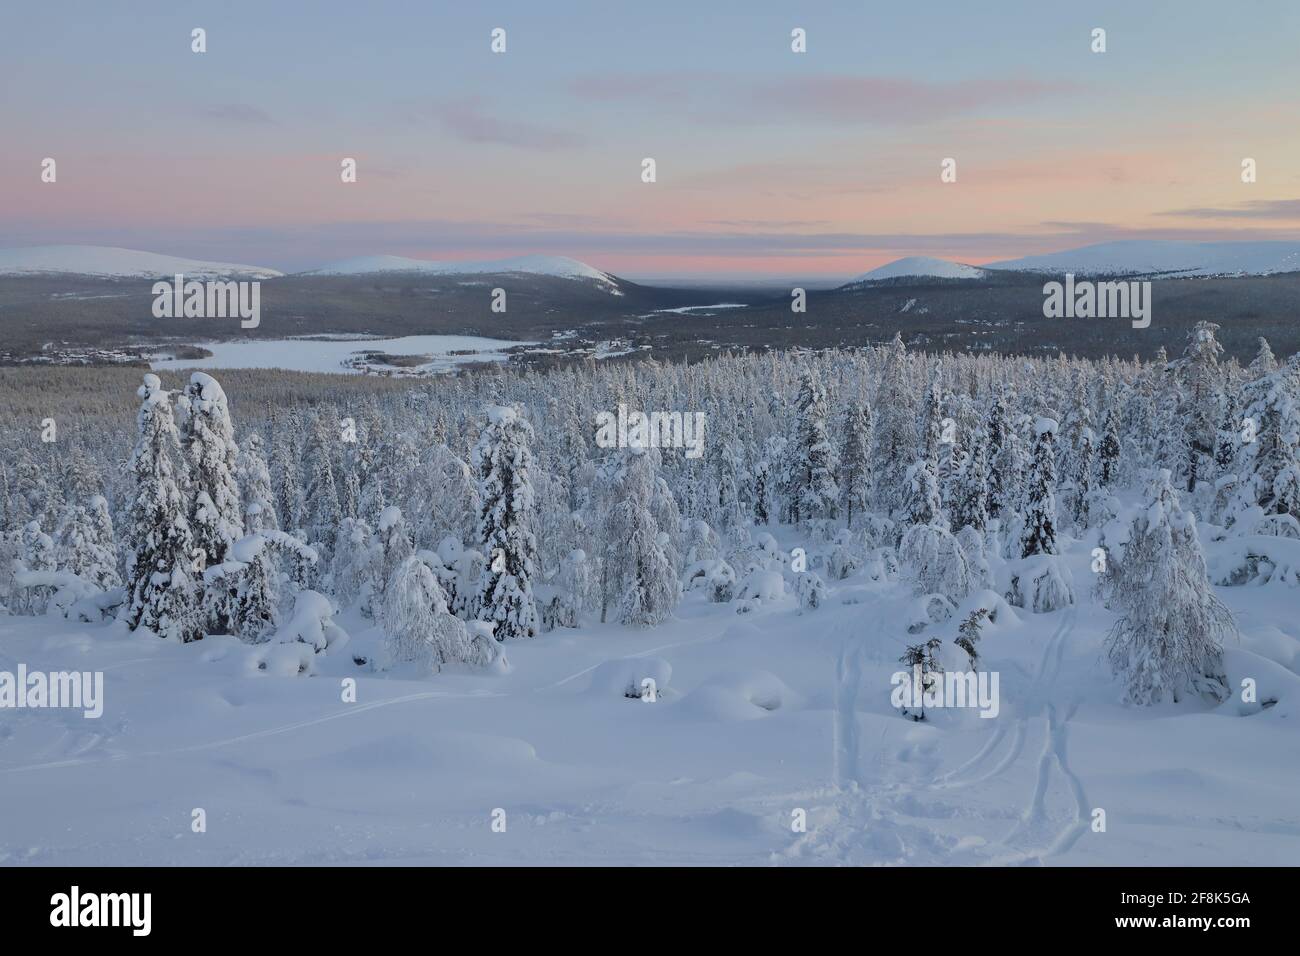 View over a snowy landscape in Finland Stock Photo